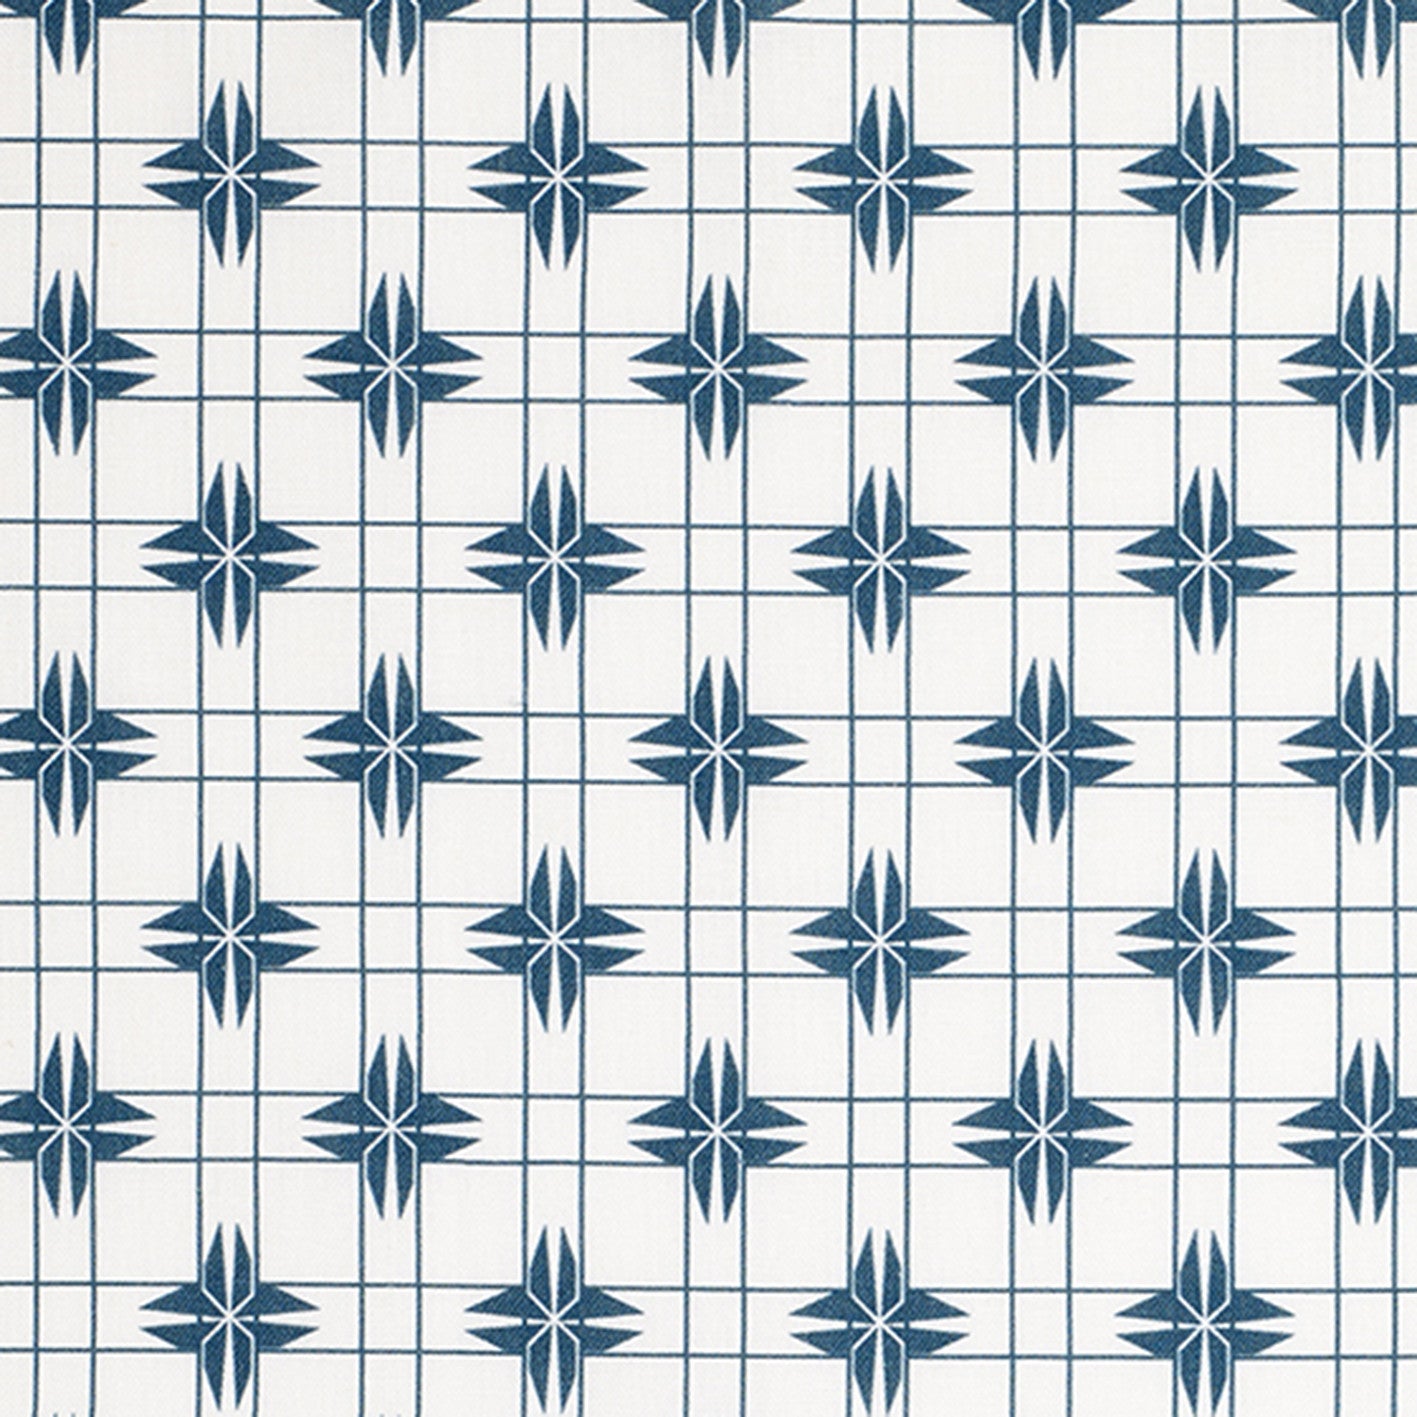 Pueblo Geometric Pattern Cotton Linen Home Decor Fabric by meter or yard for curtains, blinds, or upholstery - Petrol Blue ships from Canada (USA)